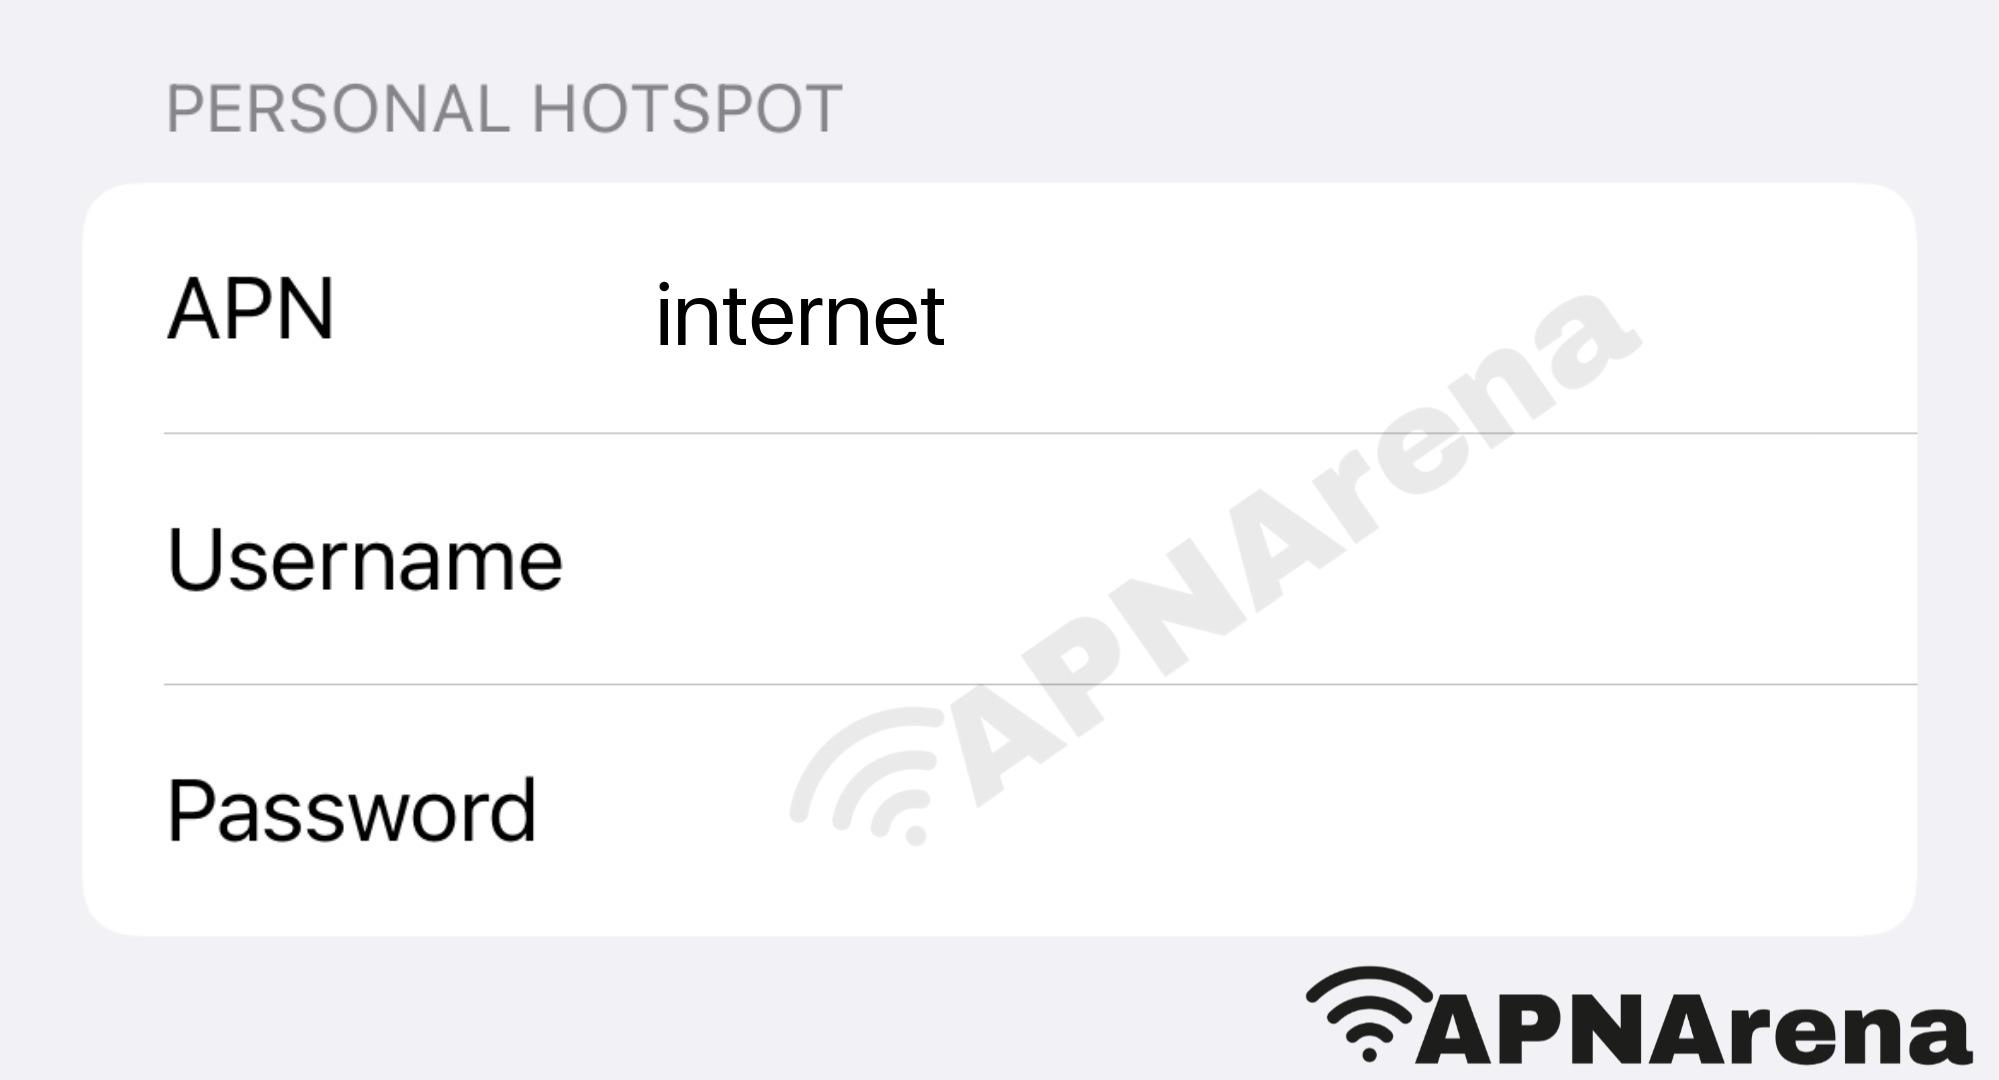 Cellcard/Mobitel Personal Hotspot Settings for iPhone